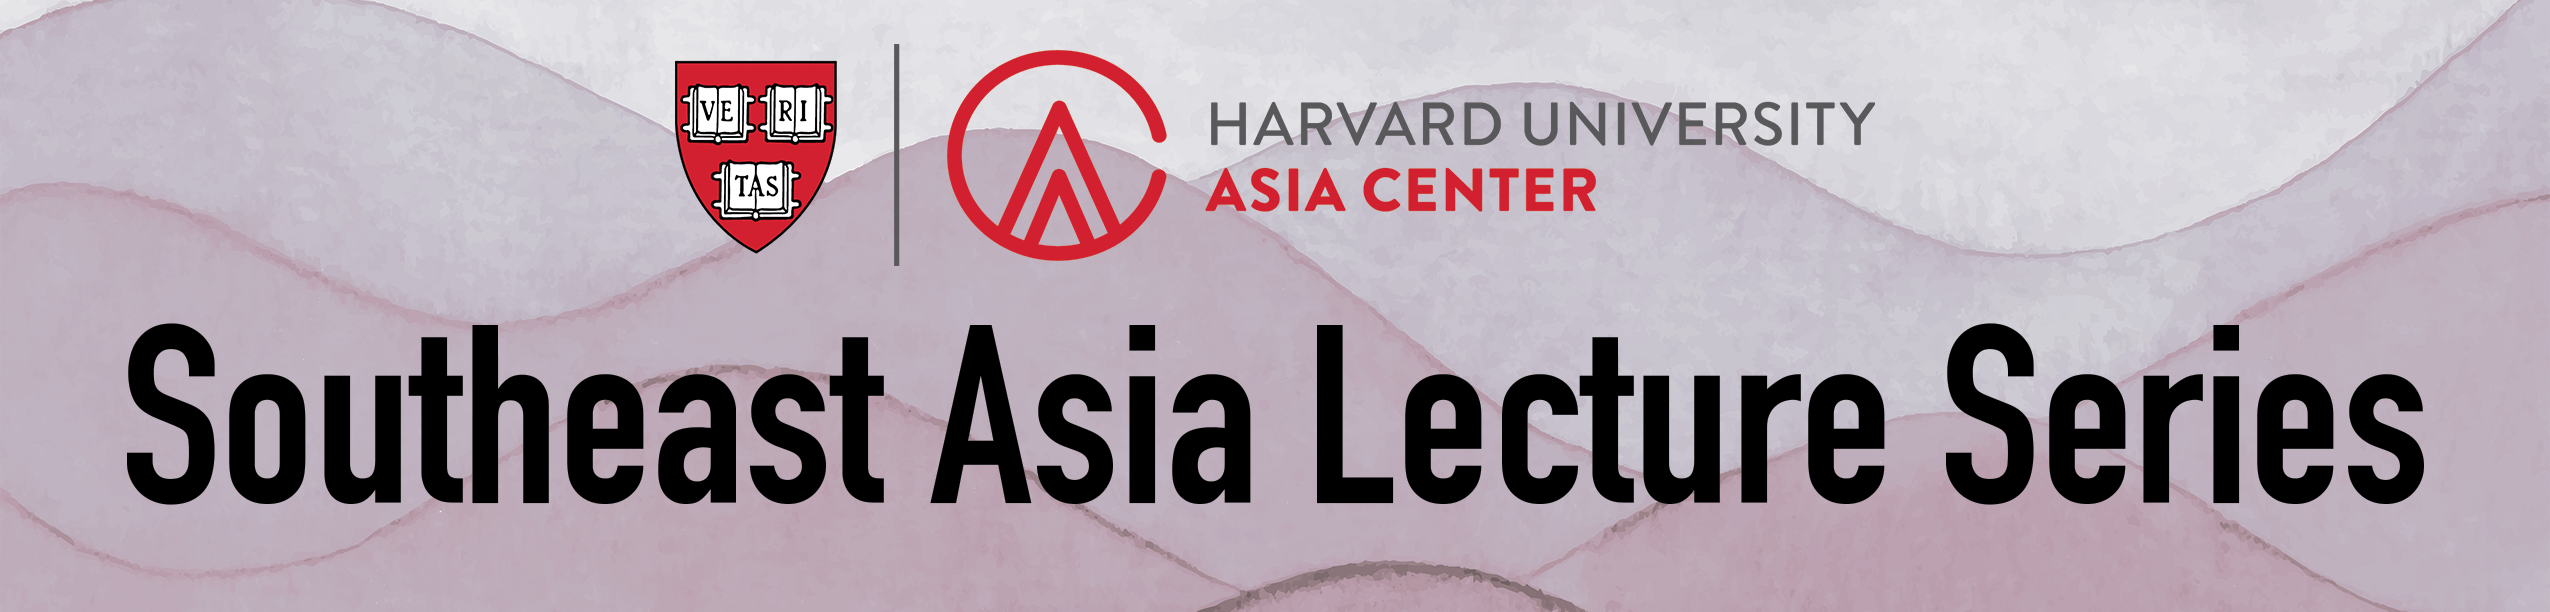 Southeast Asia Lecture Series Banner with Asia Center Logo